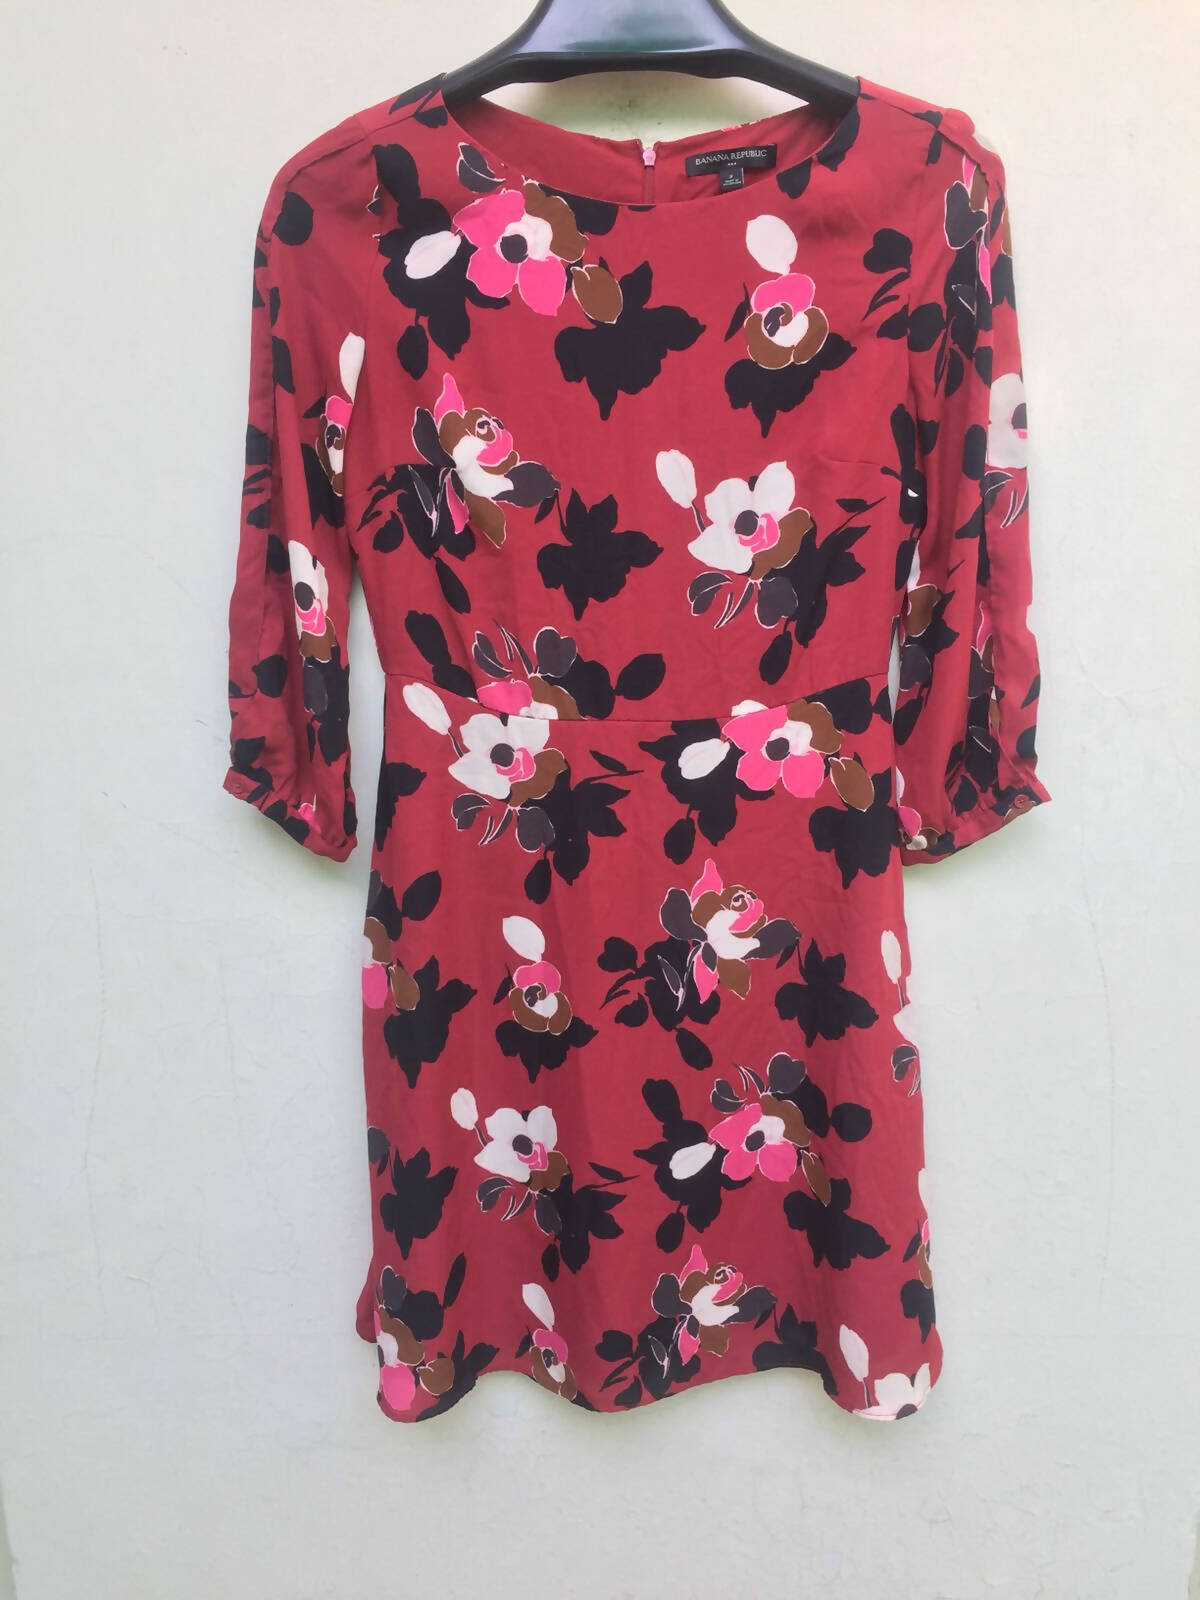 Banana Republic | Women Tops & Shirts |Floral Frock | Small Size | Preloved